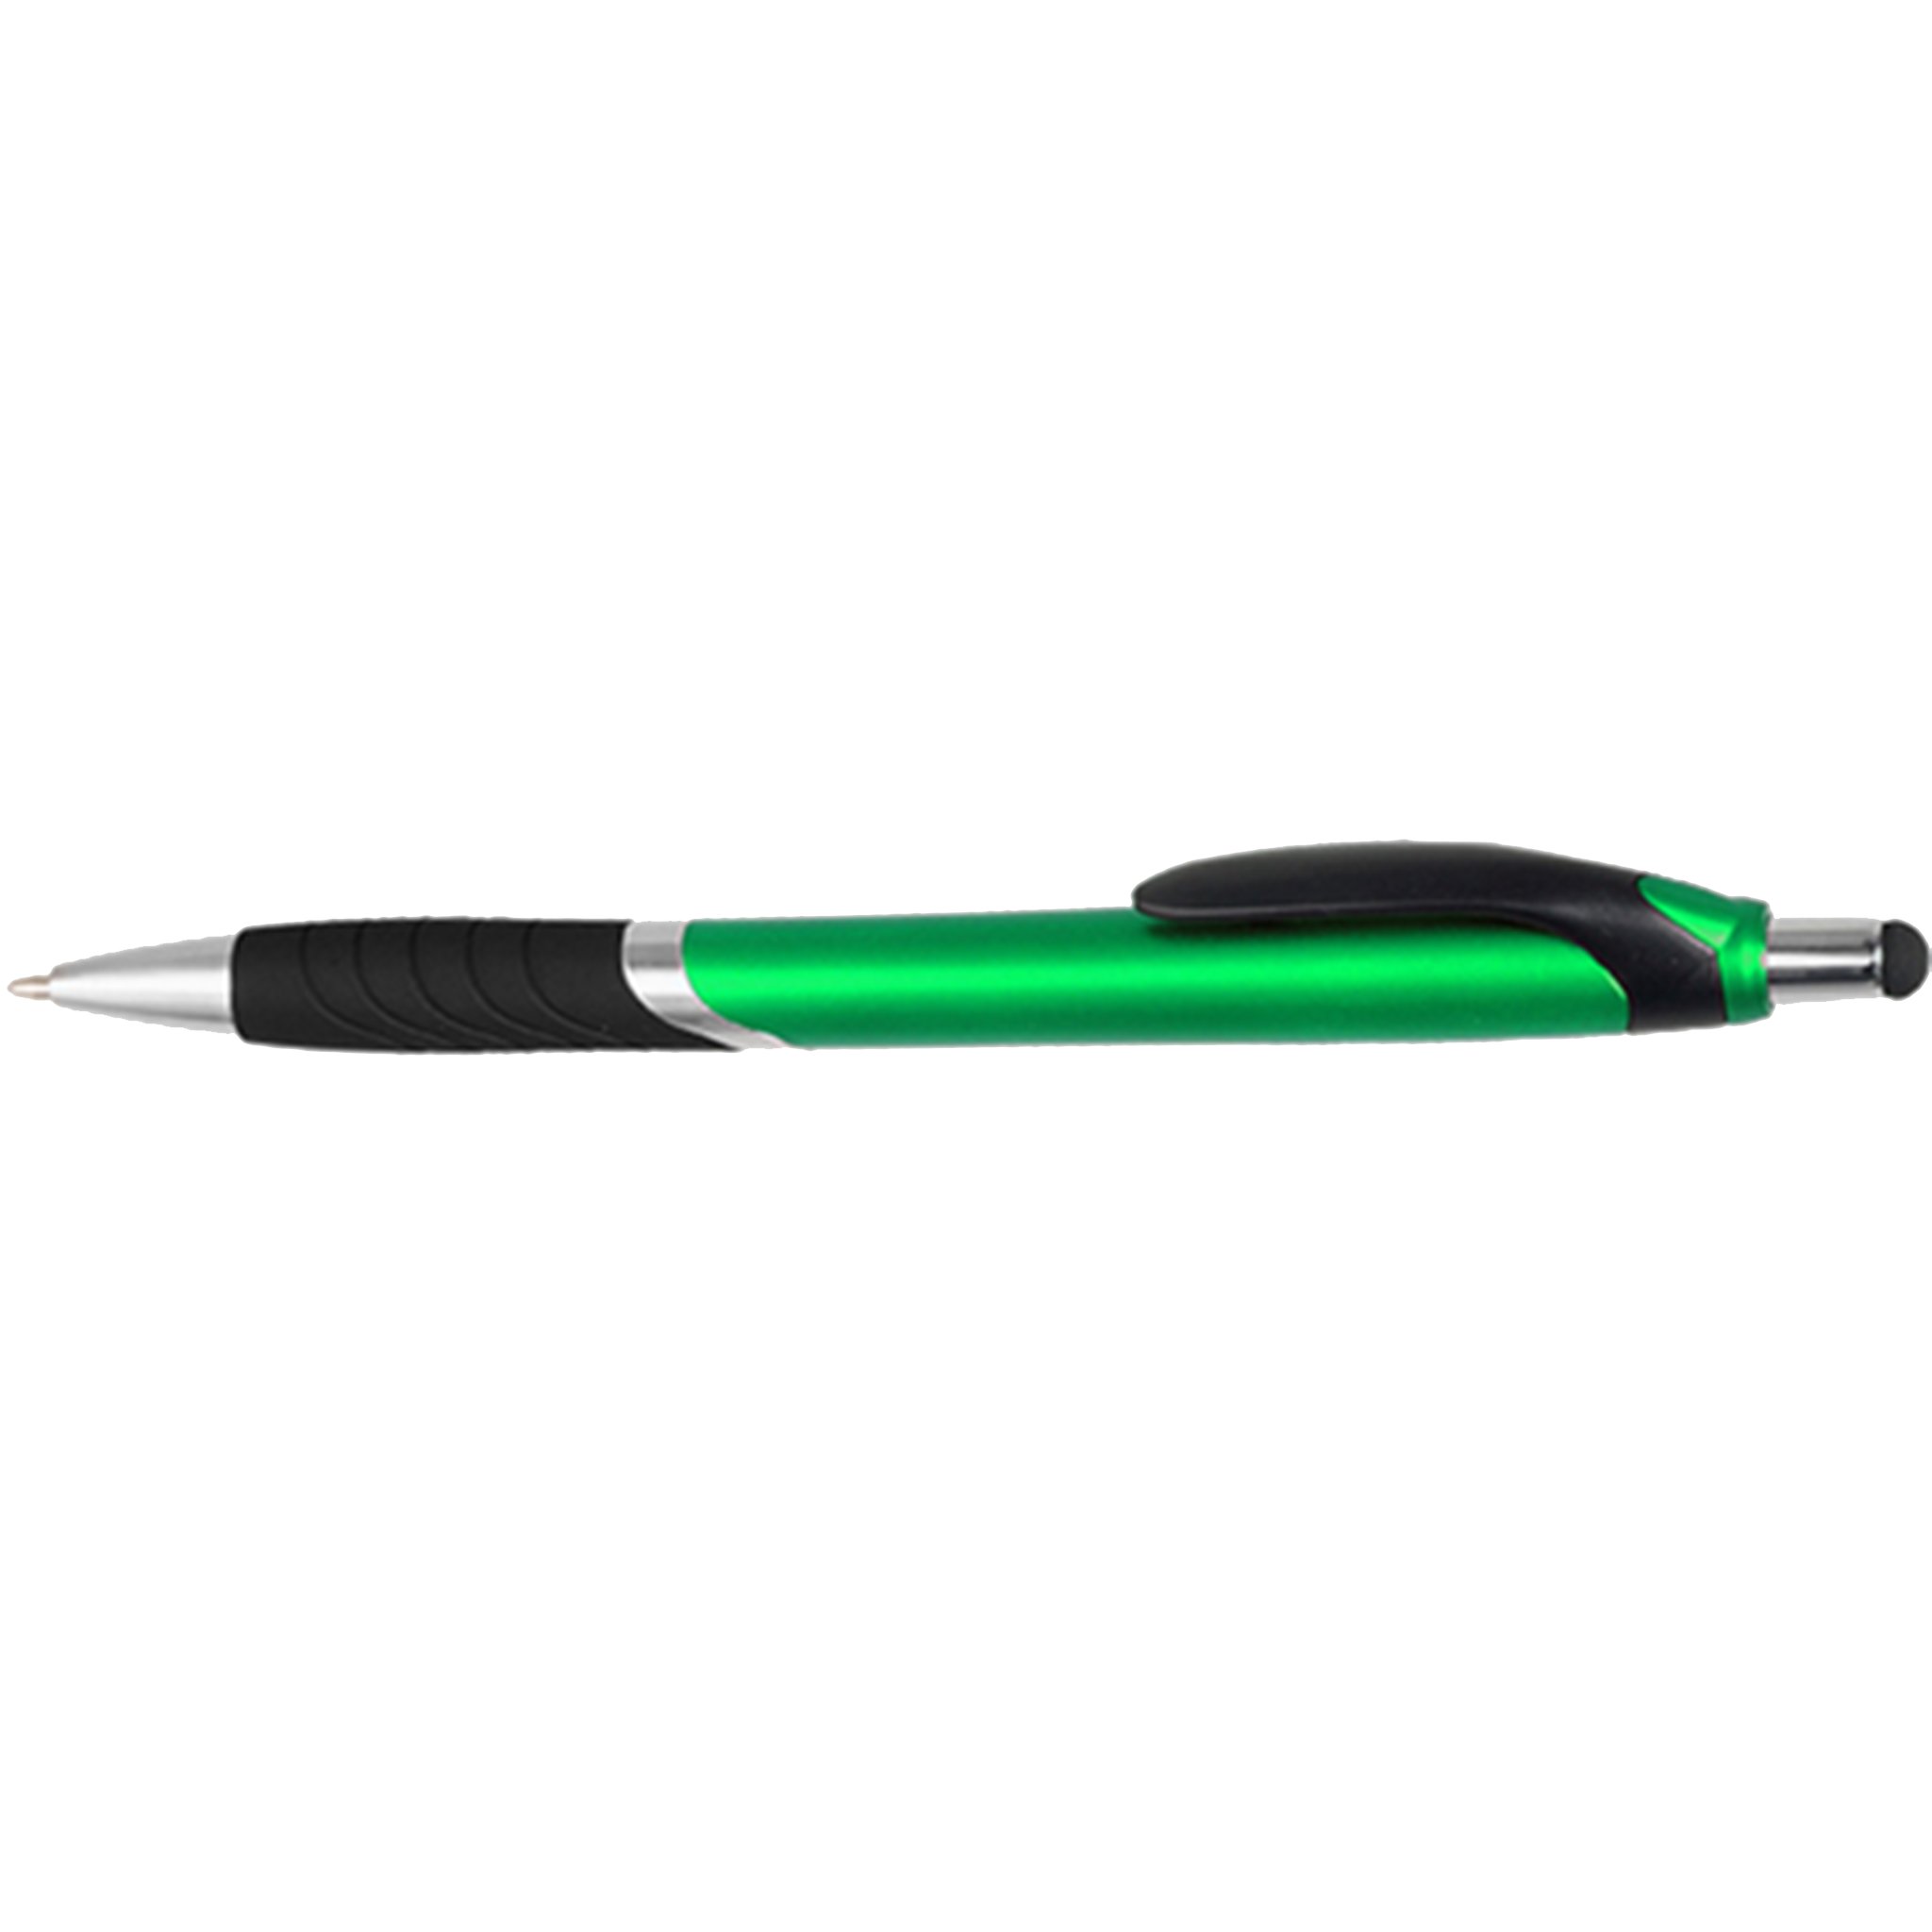 Plastic Pens with Screen Stylus - 50 Pack - Green Casing Color